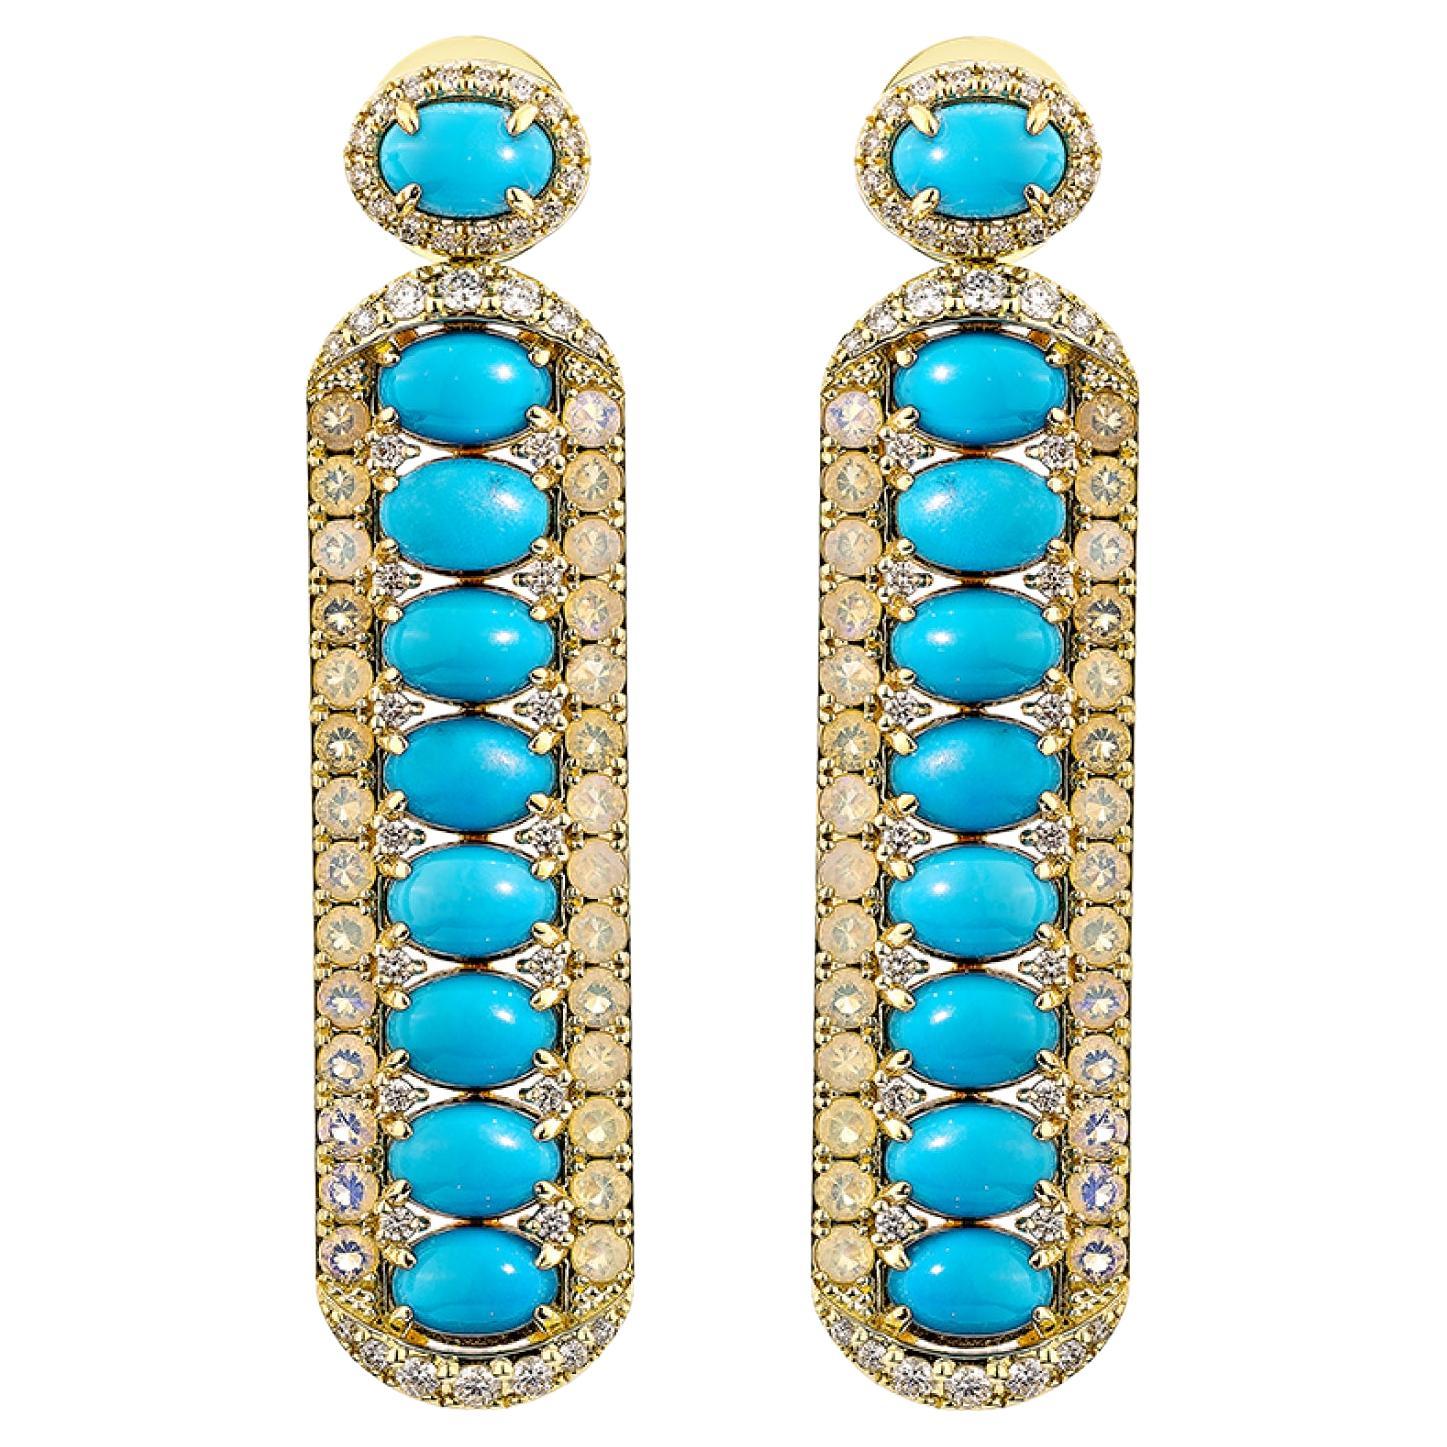 8.427 Carat Turquoise Drop Earring in 18KYG with Opal & White Diamond. For Sale